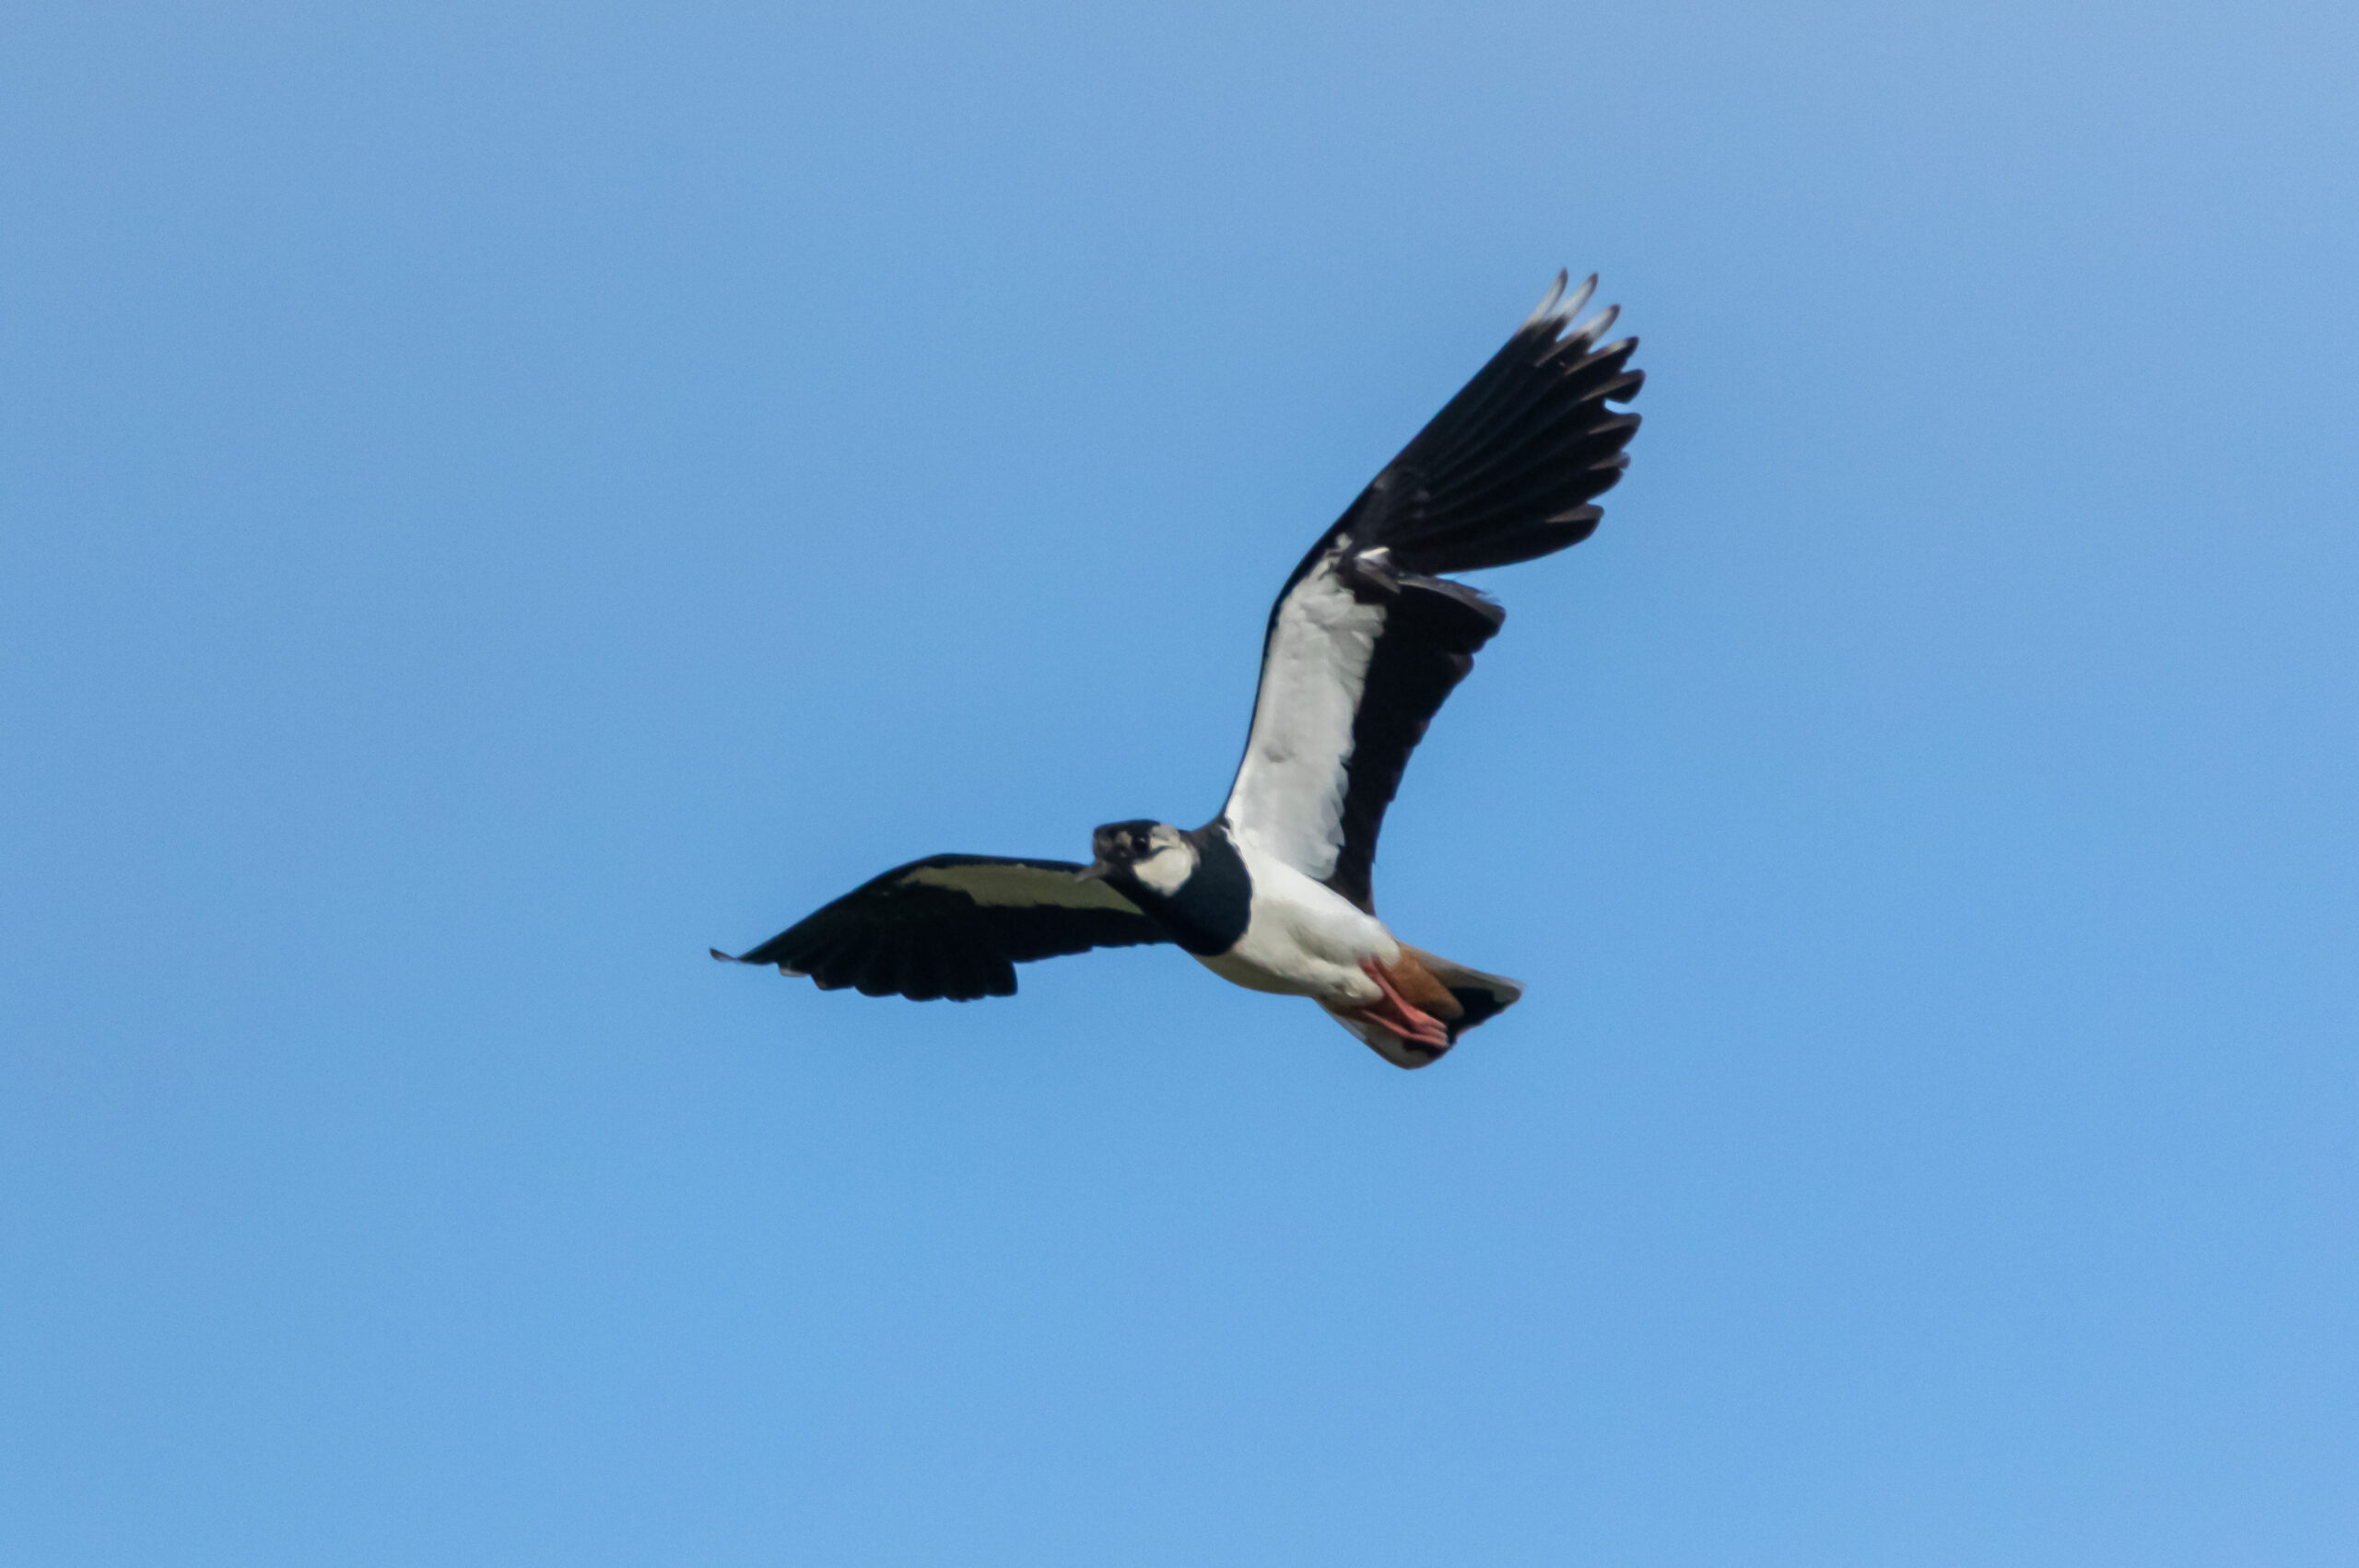 Adult lapwing in flight at the CAFRE farm.